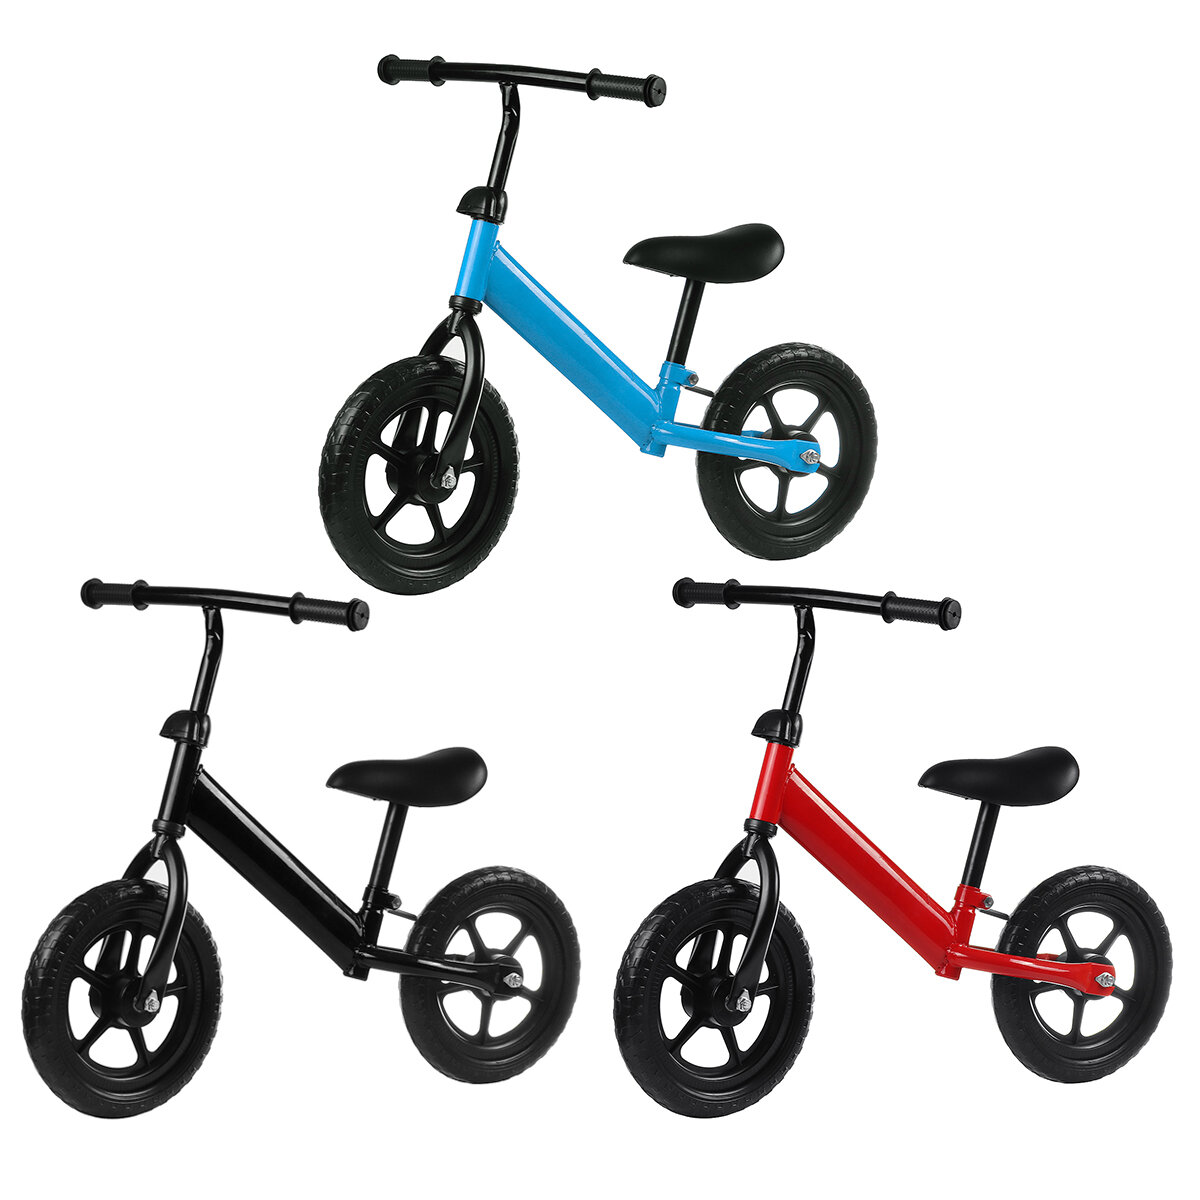 Kids Balance Bike No Pedals Height Adjustable Toddler Training Bike Running Training Exercise Outdoor Cycling